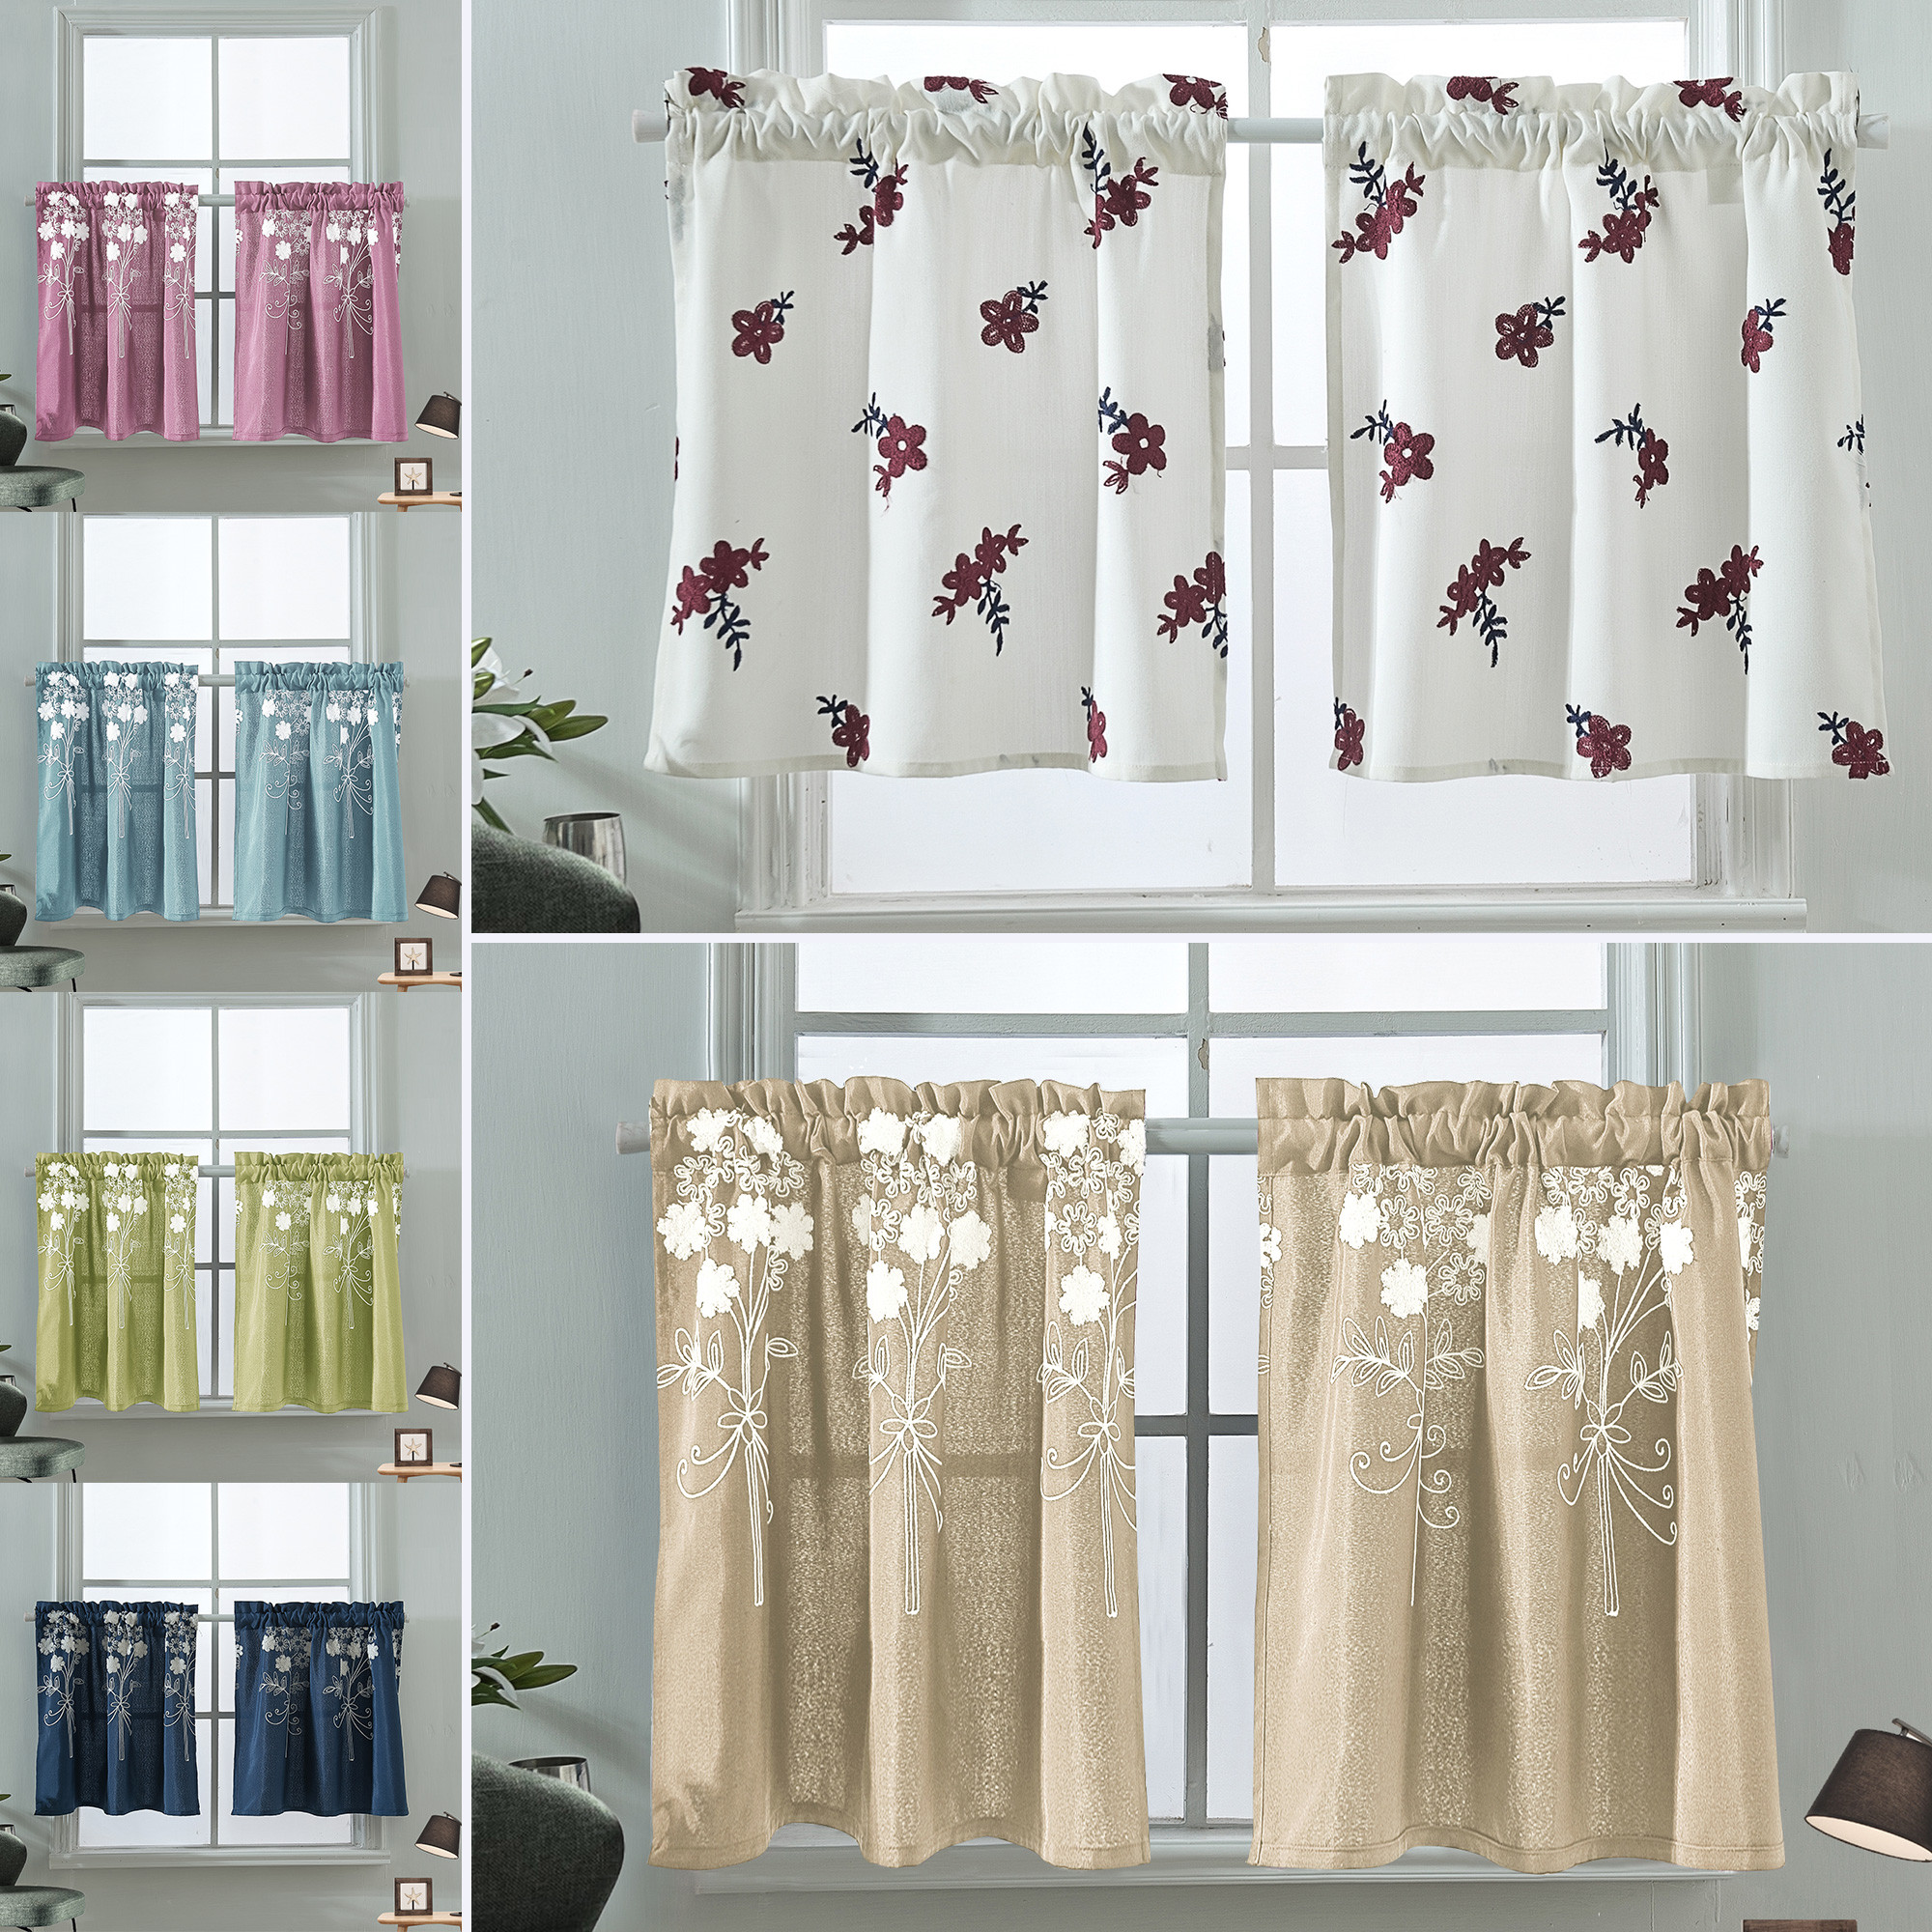 Half Curtains For Kitchen
 KITCHEN CAFE CURTAIN PANEL SHORT CURTAINS HALF DRAPES